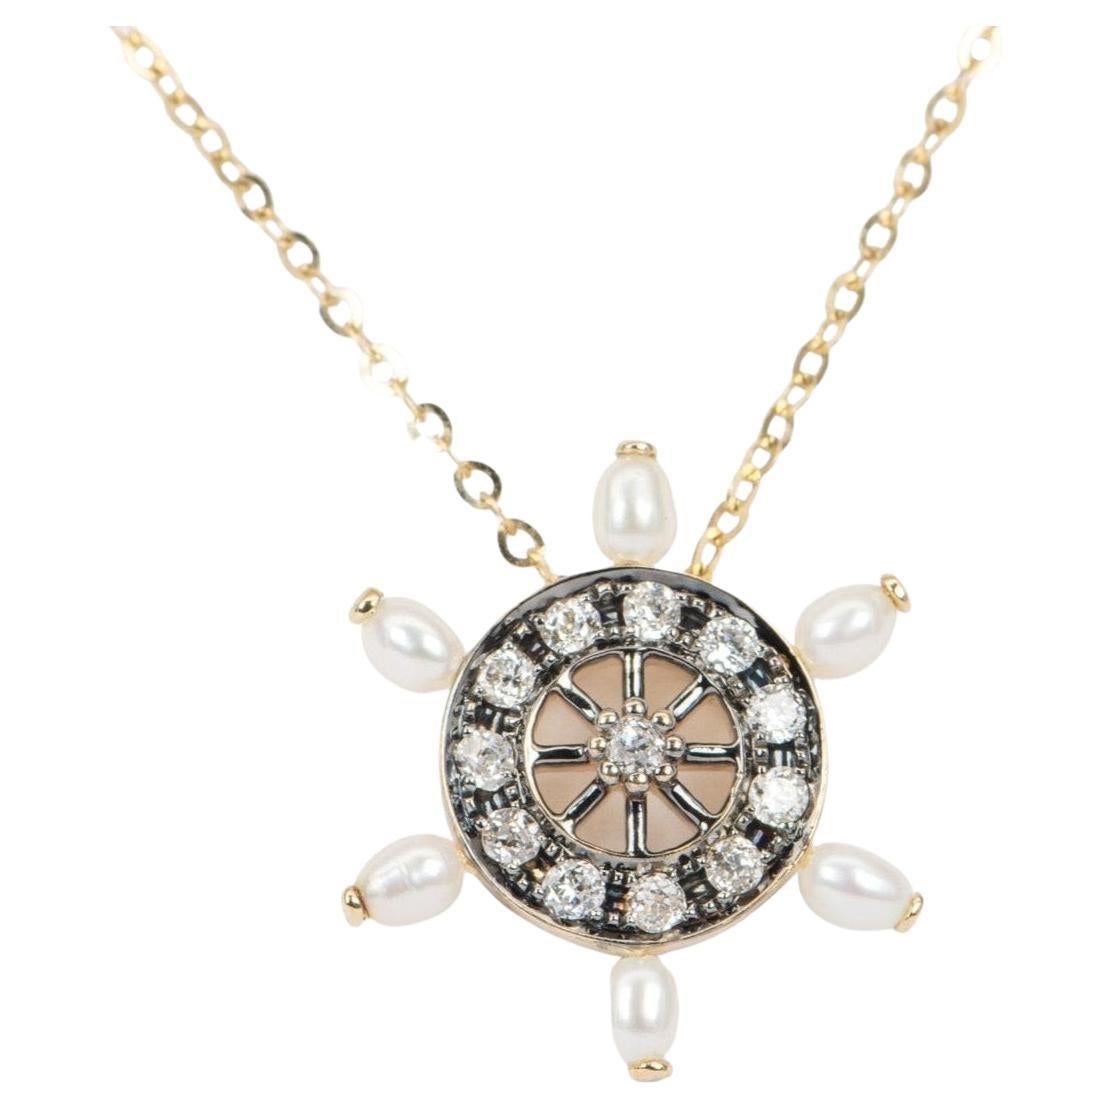 Vintage-Inspired 0.31ct Old Mine Cut Diamond and Pearl Wheel Pendant 14K Gold